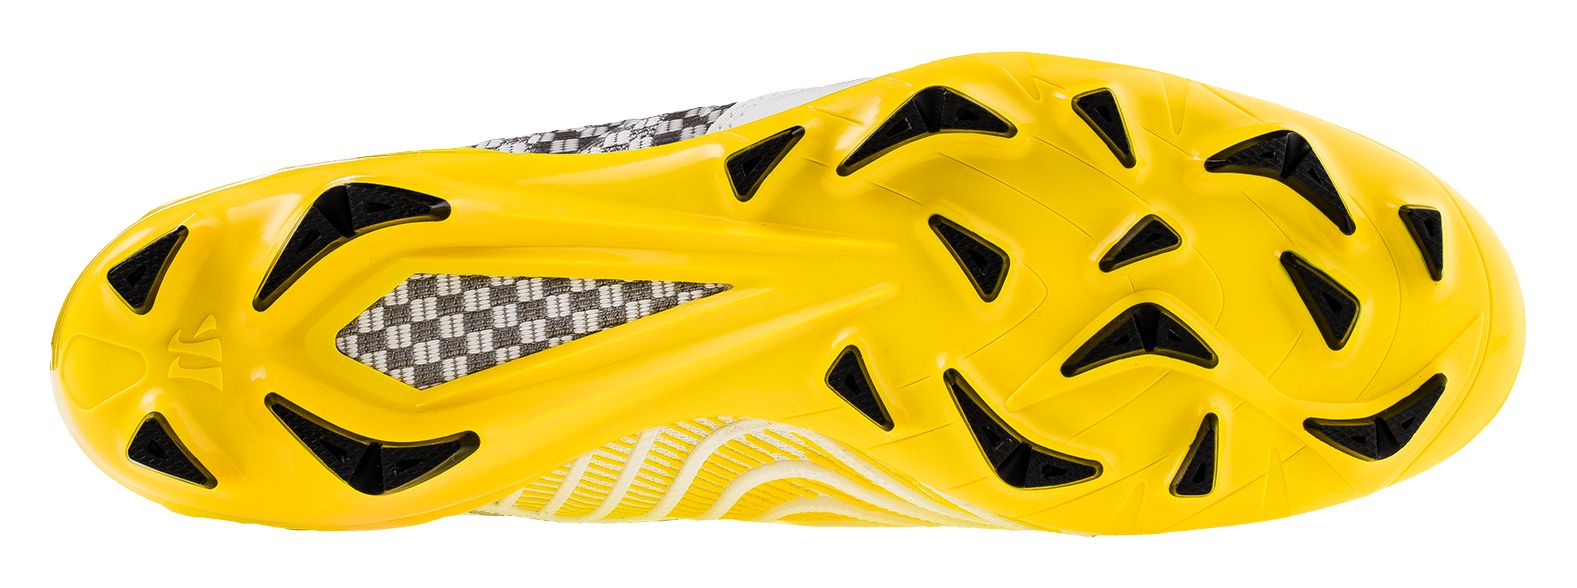 Gambler S-Lite FG, White with Silver & Cyber Yellow image number 5